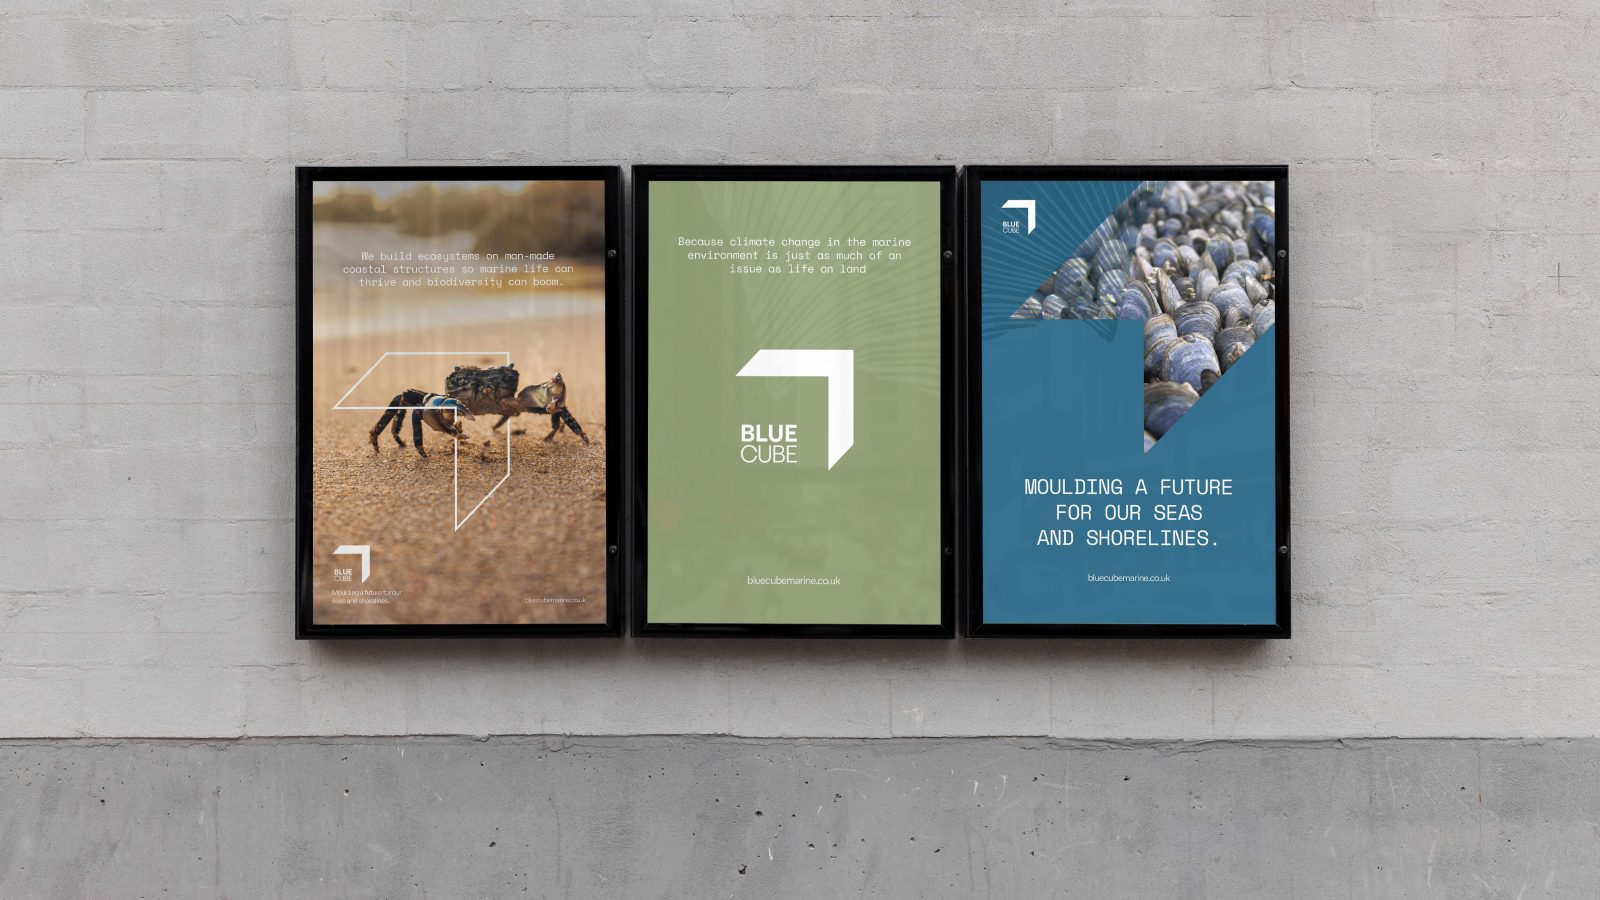 Three framed posters mounted on a concrete wall, each promoting environmental sustainability with images of a robotic device on arid land, a geometric blue cube, and hands holding earth designed by a Brand Agency UK.